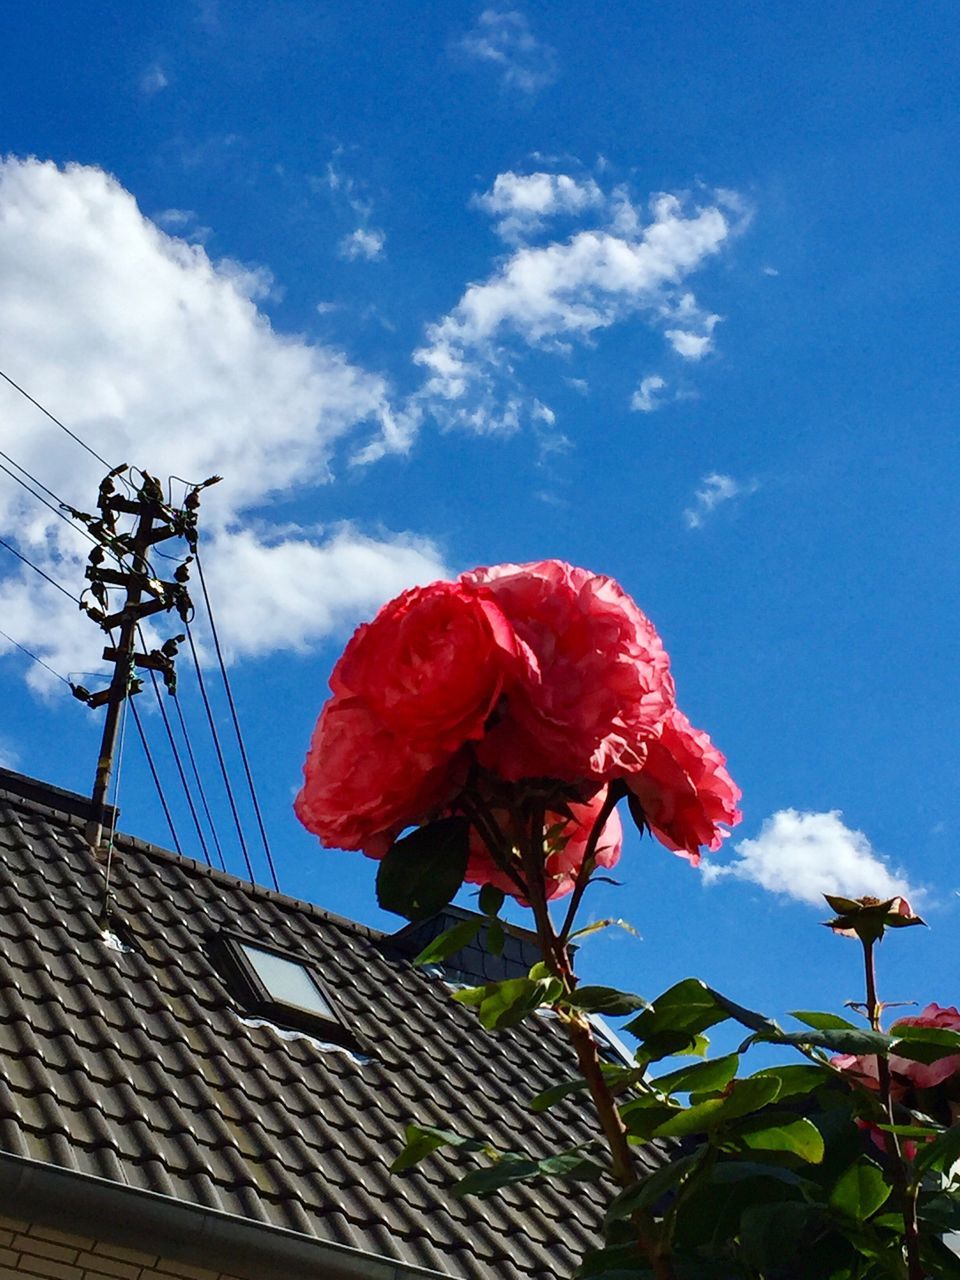 red, low angle view, flower, sky, cloud - sky, day, nature, beauty in nature, outdoors, fragility, no people, growth, blue, freshness, flower head, close-up